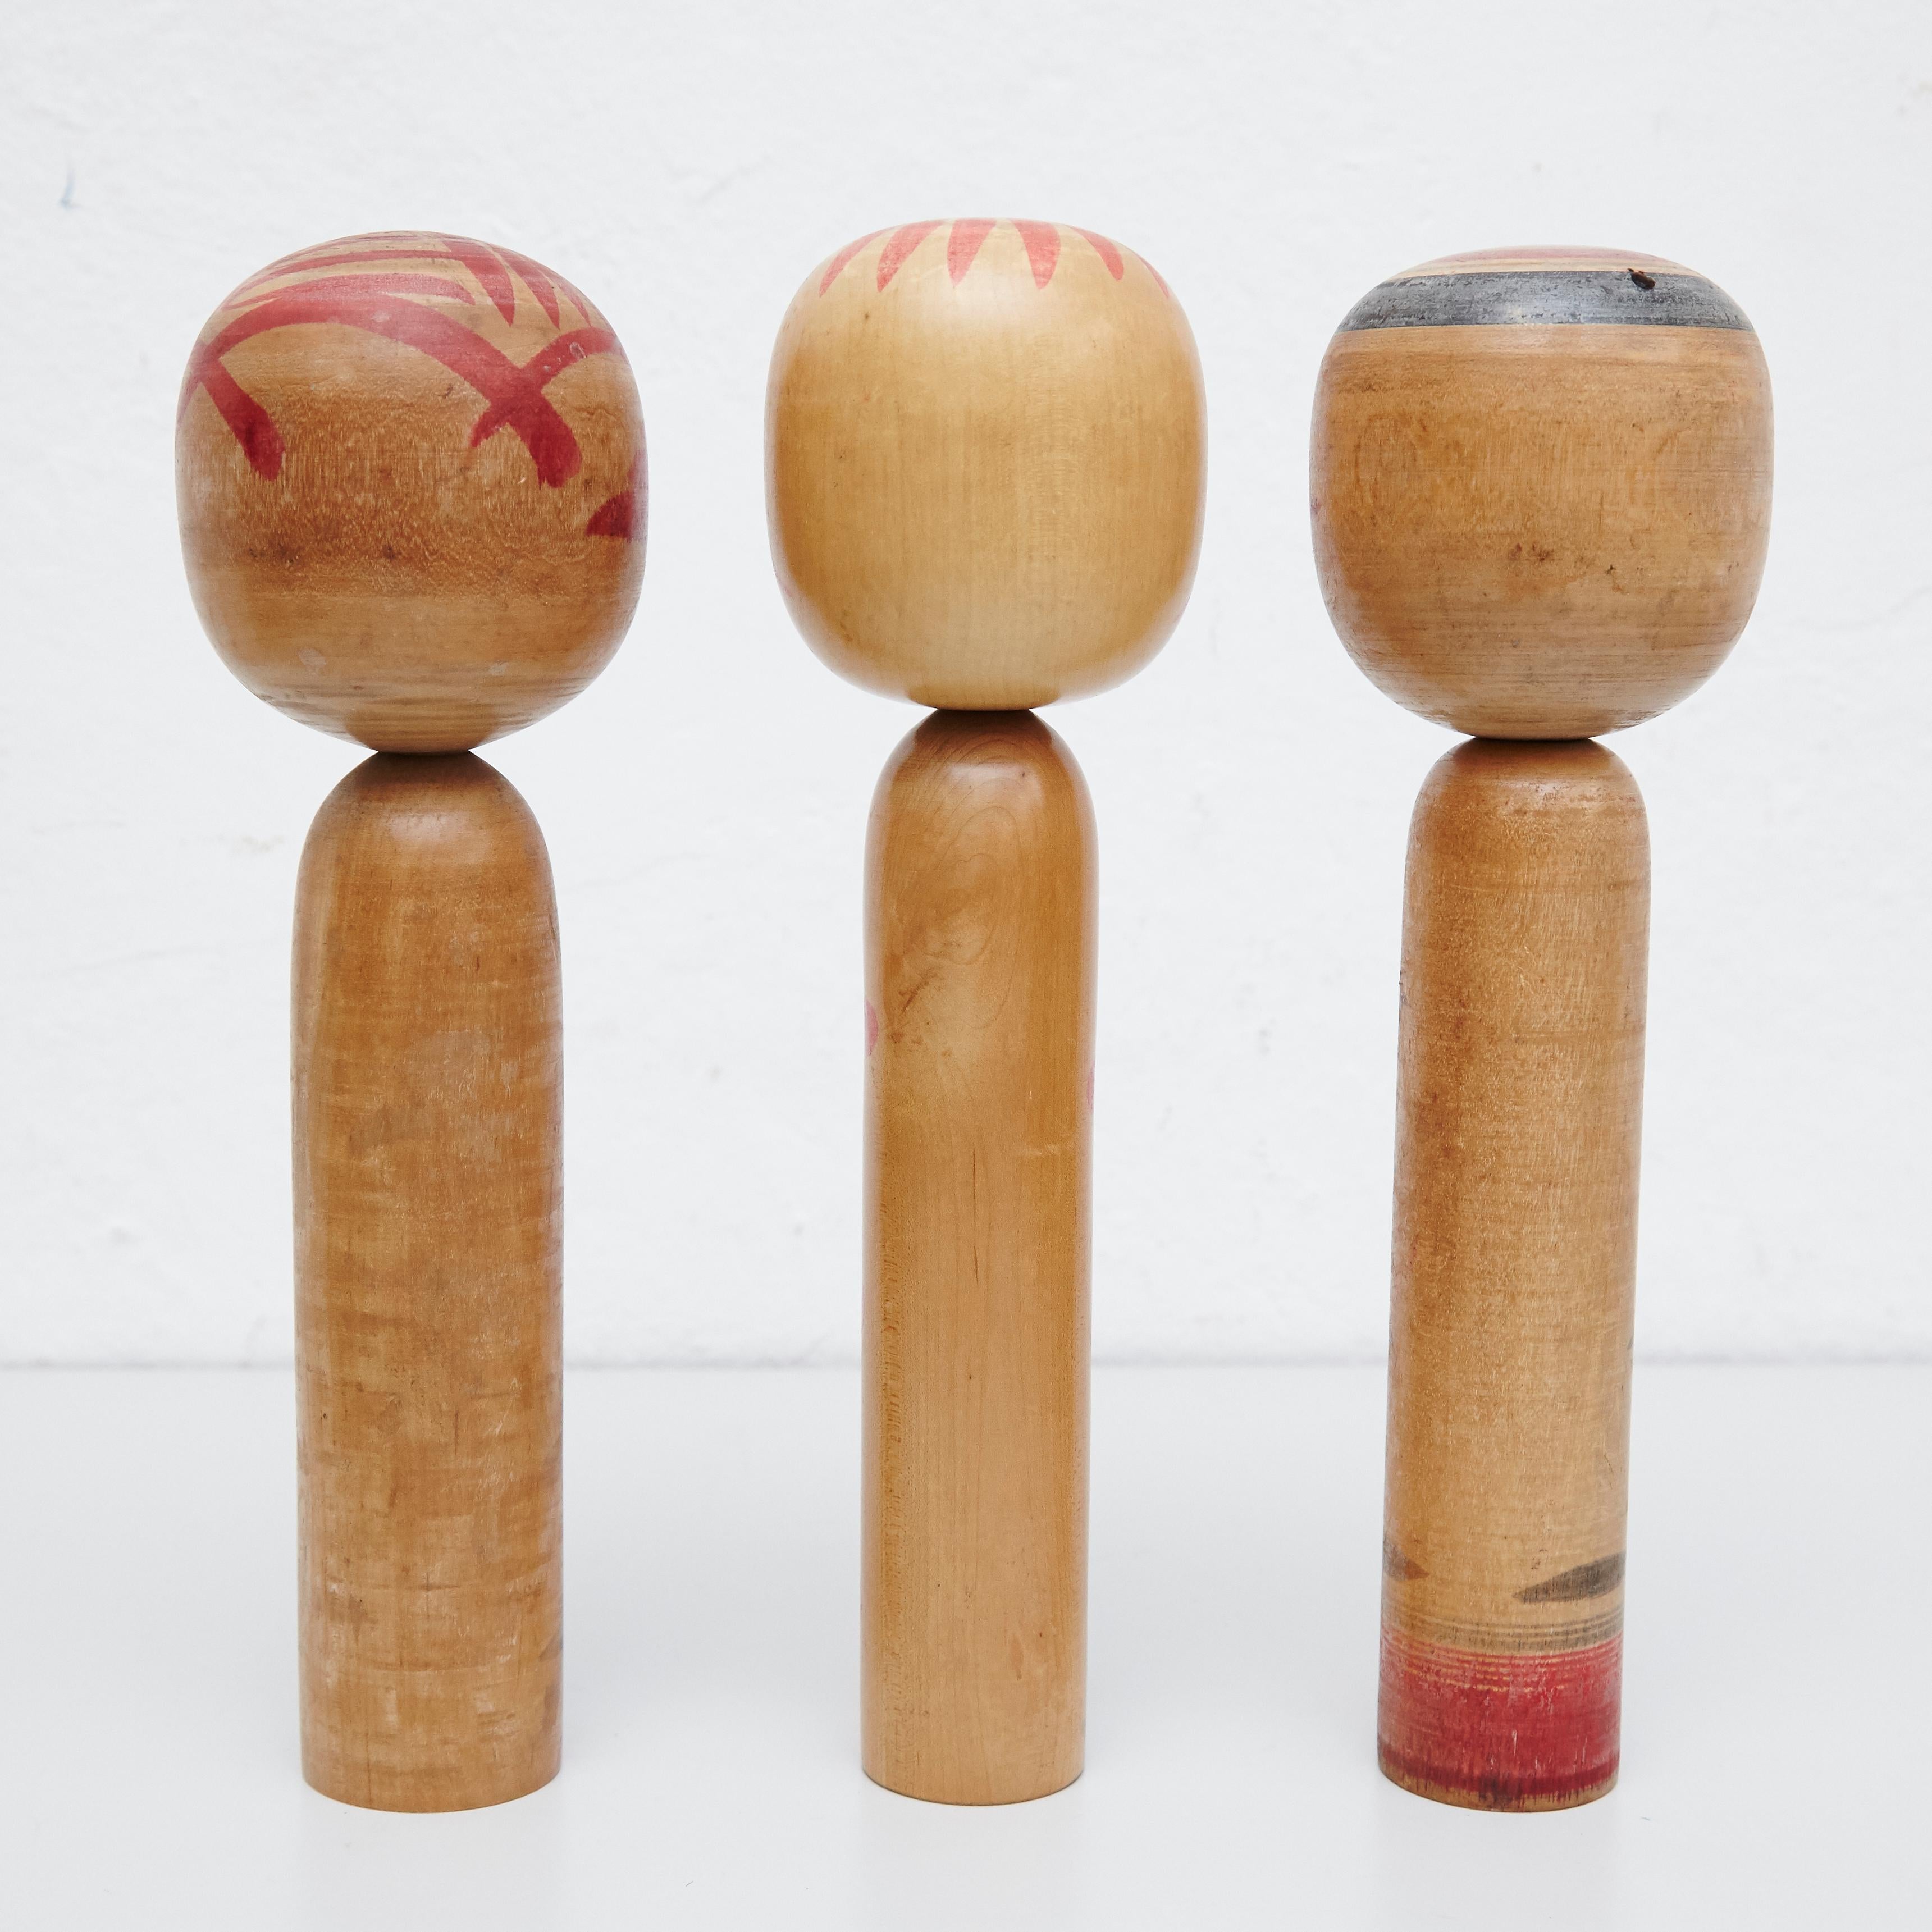 Japanese dolls called Kokeshi of the early 20th century.
Provenance from the northern Japan.
Set of 3.

Measures: 

30 x 9 cm
30.5 x 8.5 cm
30 x 9 cm


Handmade by Japanese artisants from wood. Have a simple trunk as a body and an